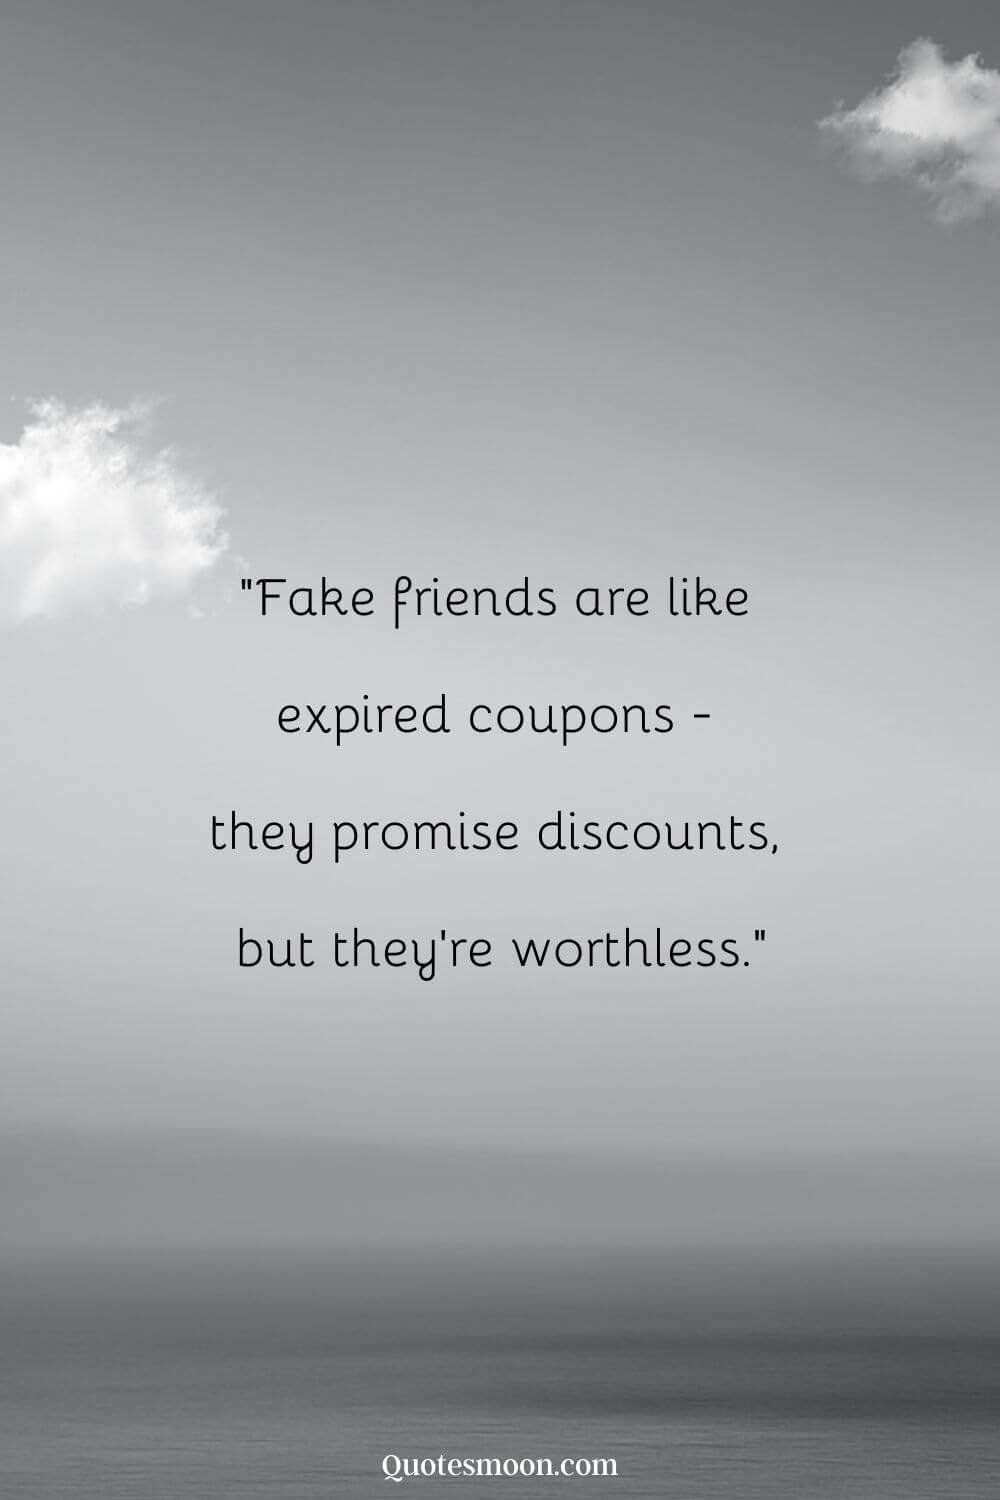 fake friend are like quotes images new